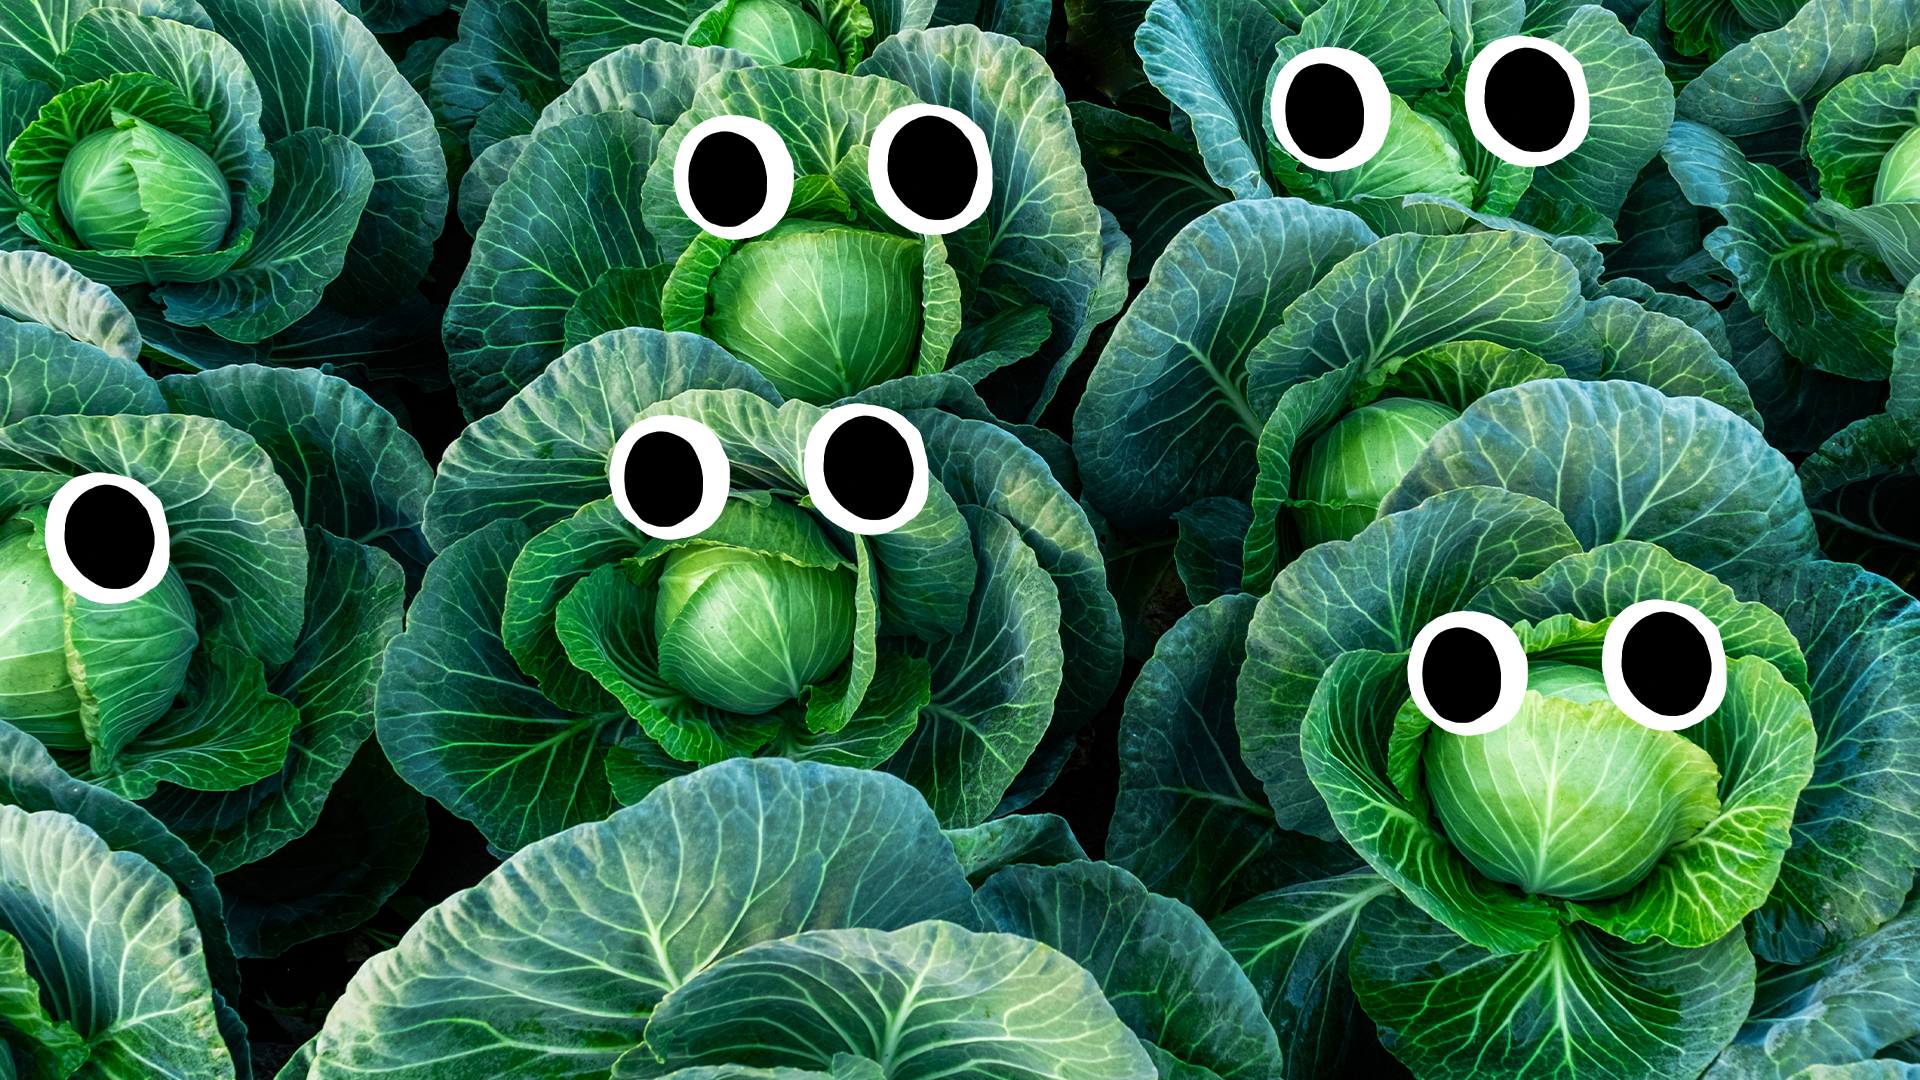 Rows of cabbages with faces